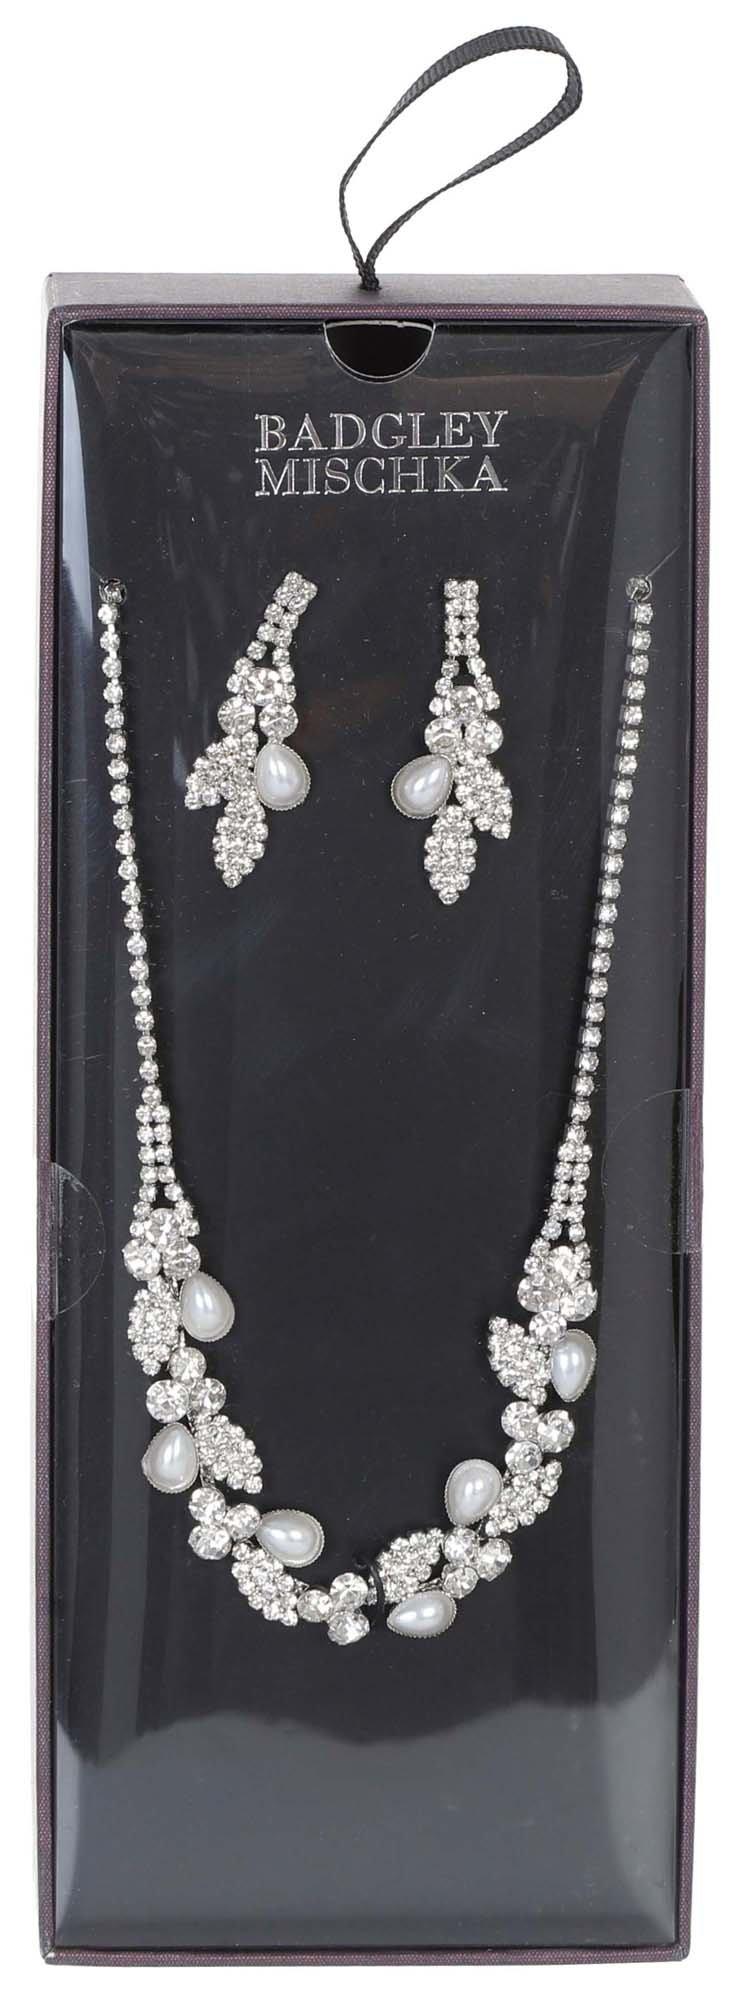 3 Pc Crystal Necklace and Earring Set